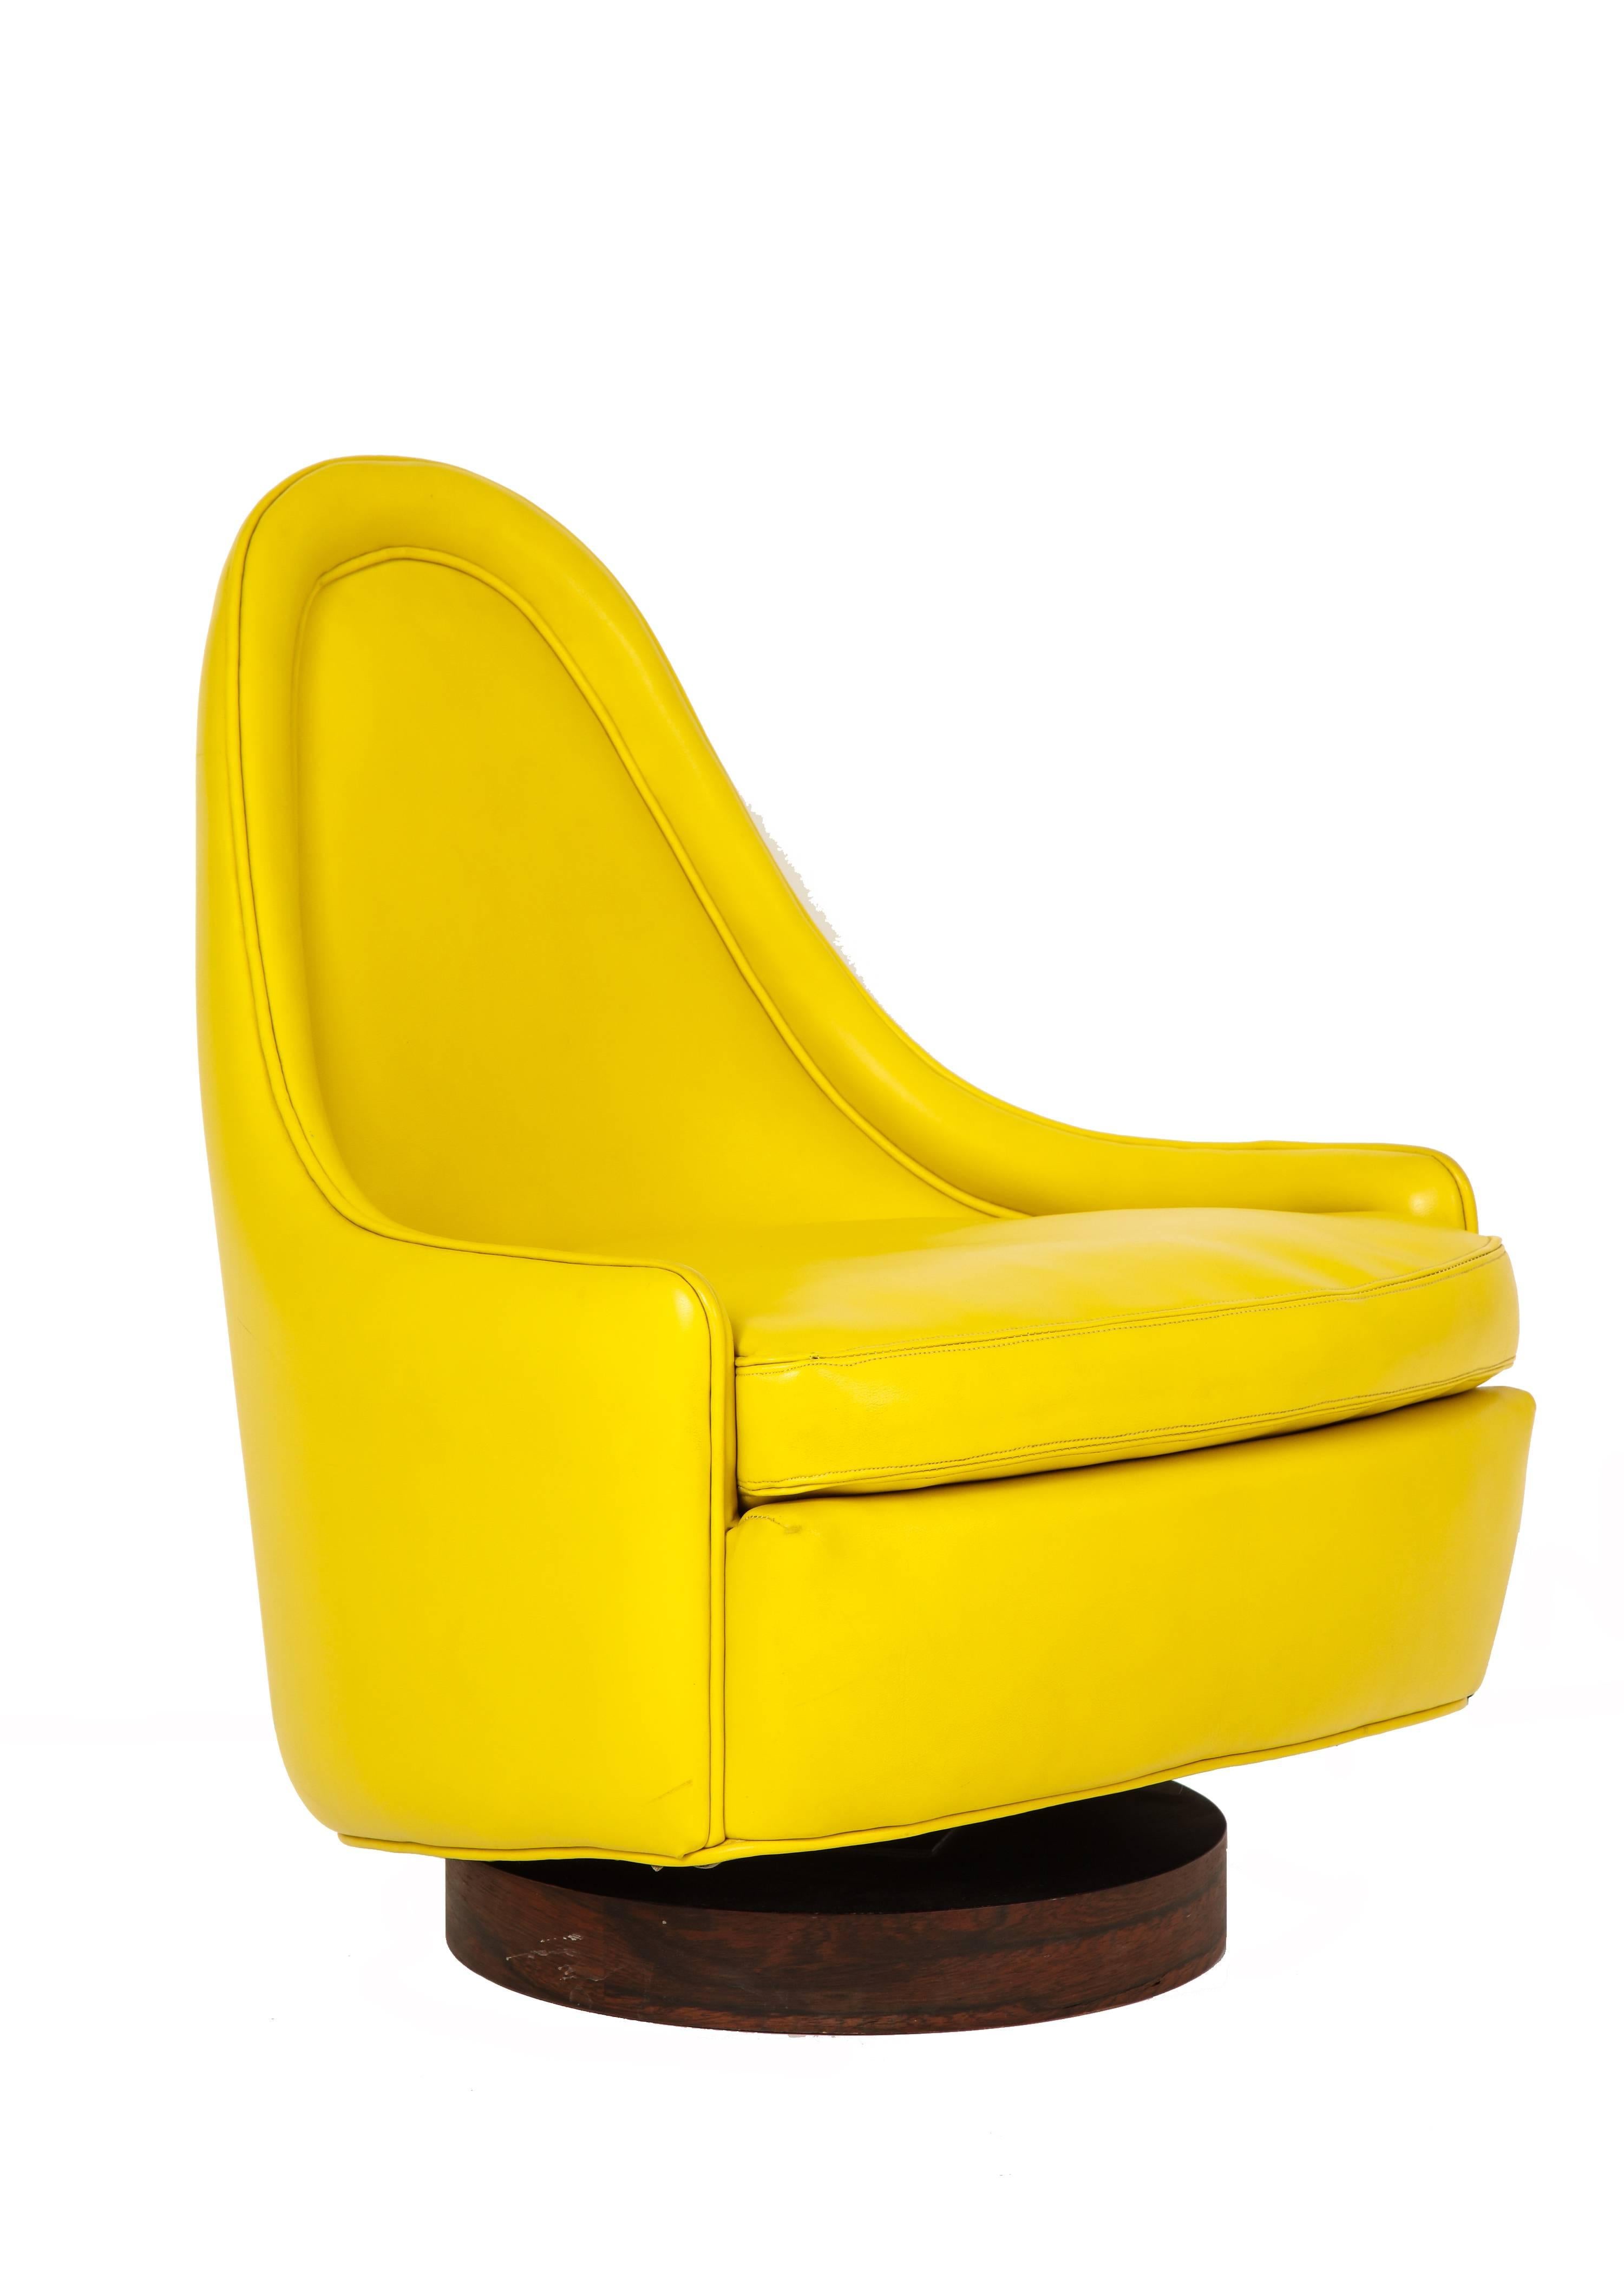 Milo Baughman Swiveling Lounge Chair, Yellow, Rosewood, Signed. Teardrop form petite slipper lounge chair that tilts and swivels on a rosewood veneer circular base and upholstered in the original 1970s bright canary yellow vinyl. Retains two Thayer